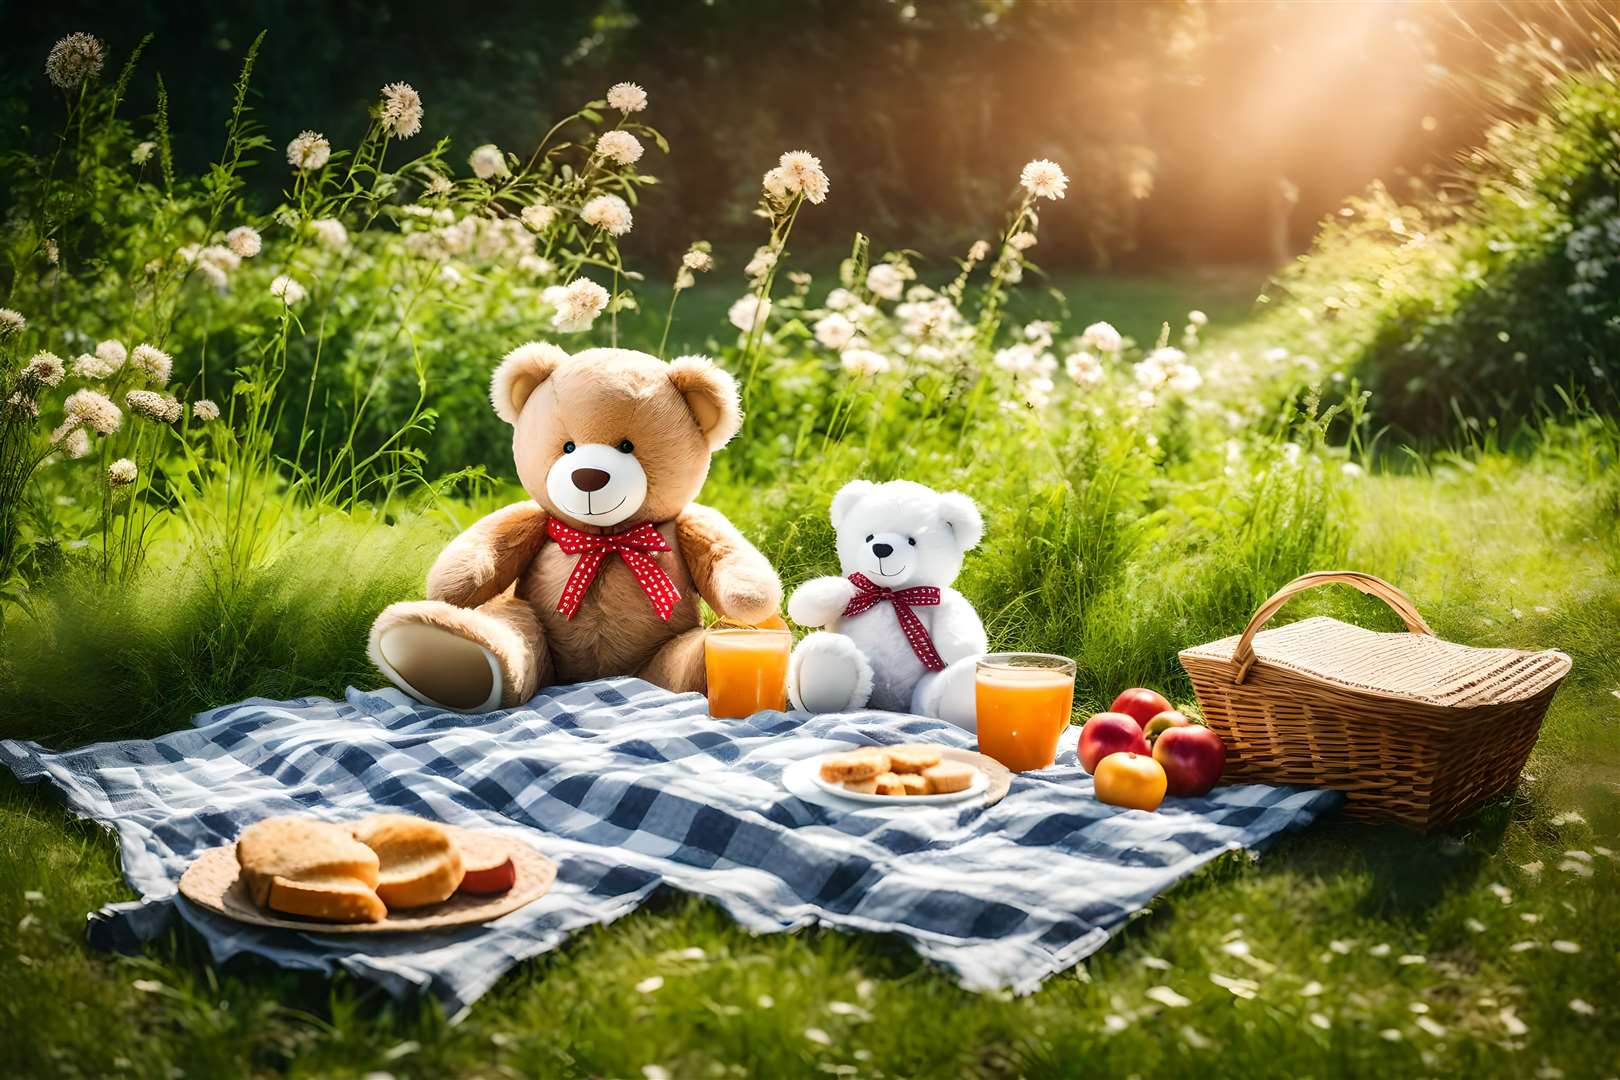 The community party at Brora this summer will have the theme 'Royal Teddy Bear Picnic Party'.